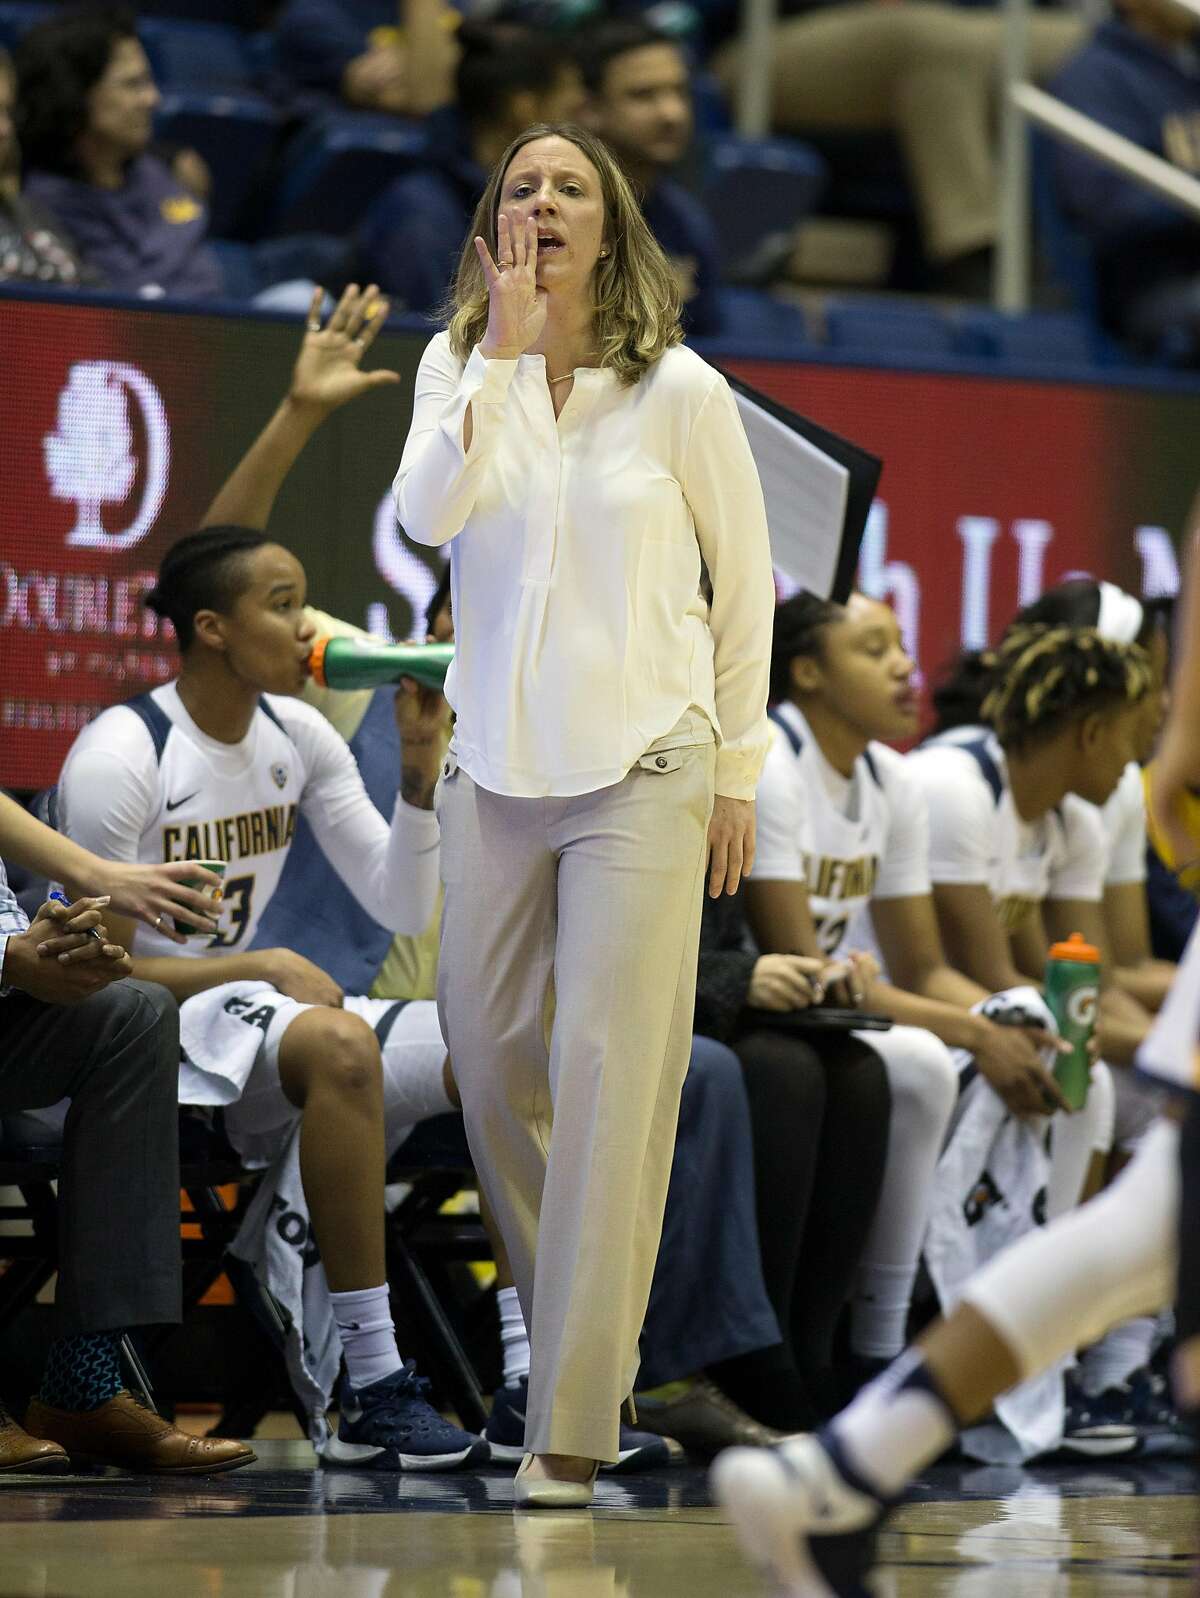 California head coach Lindsay Gottlieb shouts instructions to her players during the first quarter of an NCAA women's college basketball game against Arizona State, on Friday, Jan. 20, 2017 in Berkeley, Calif.